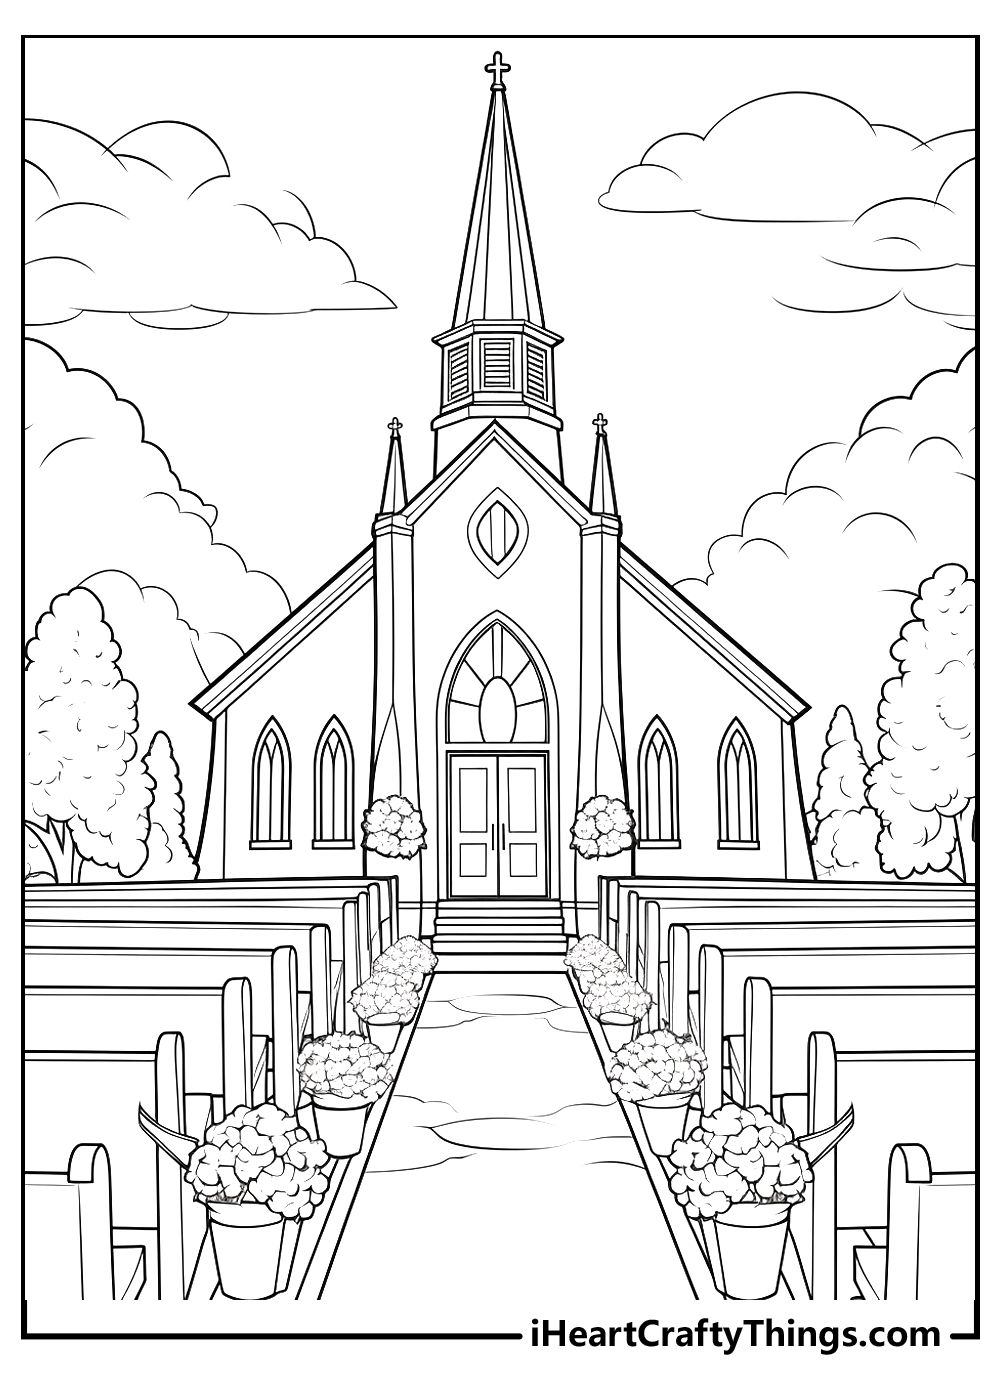 happy wedding day coloring pages